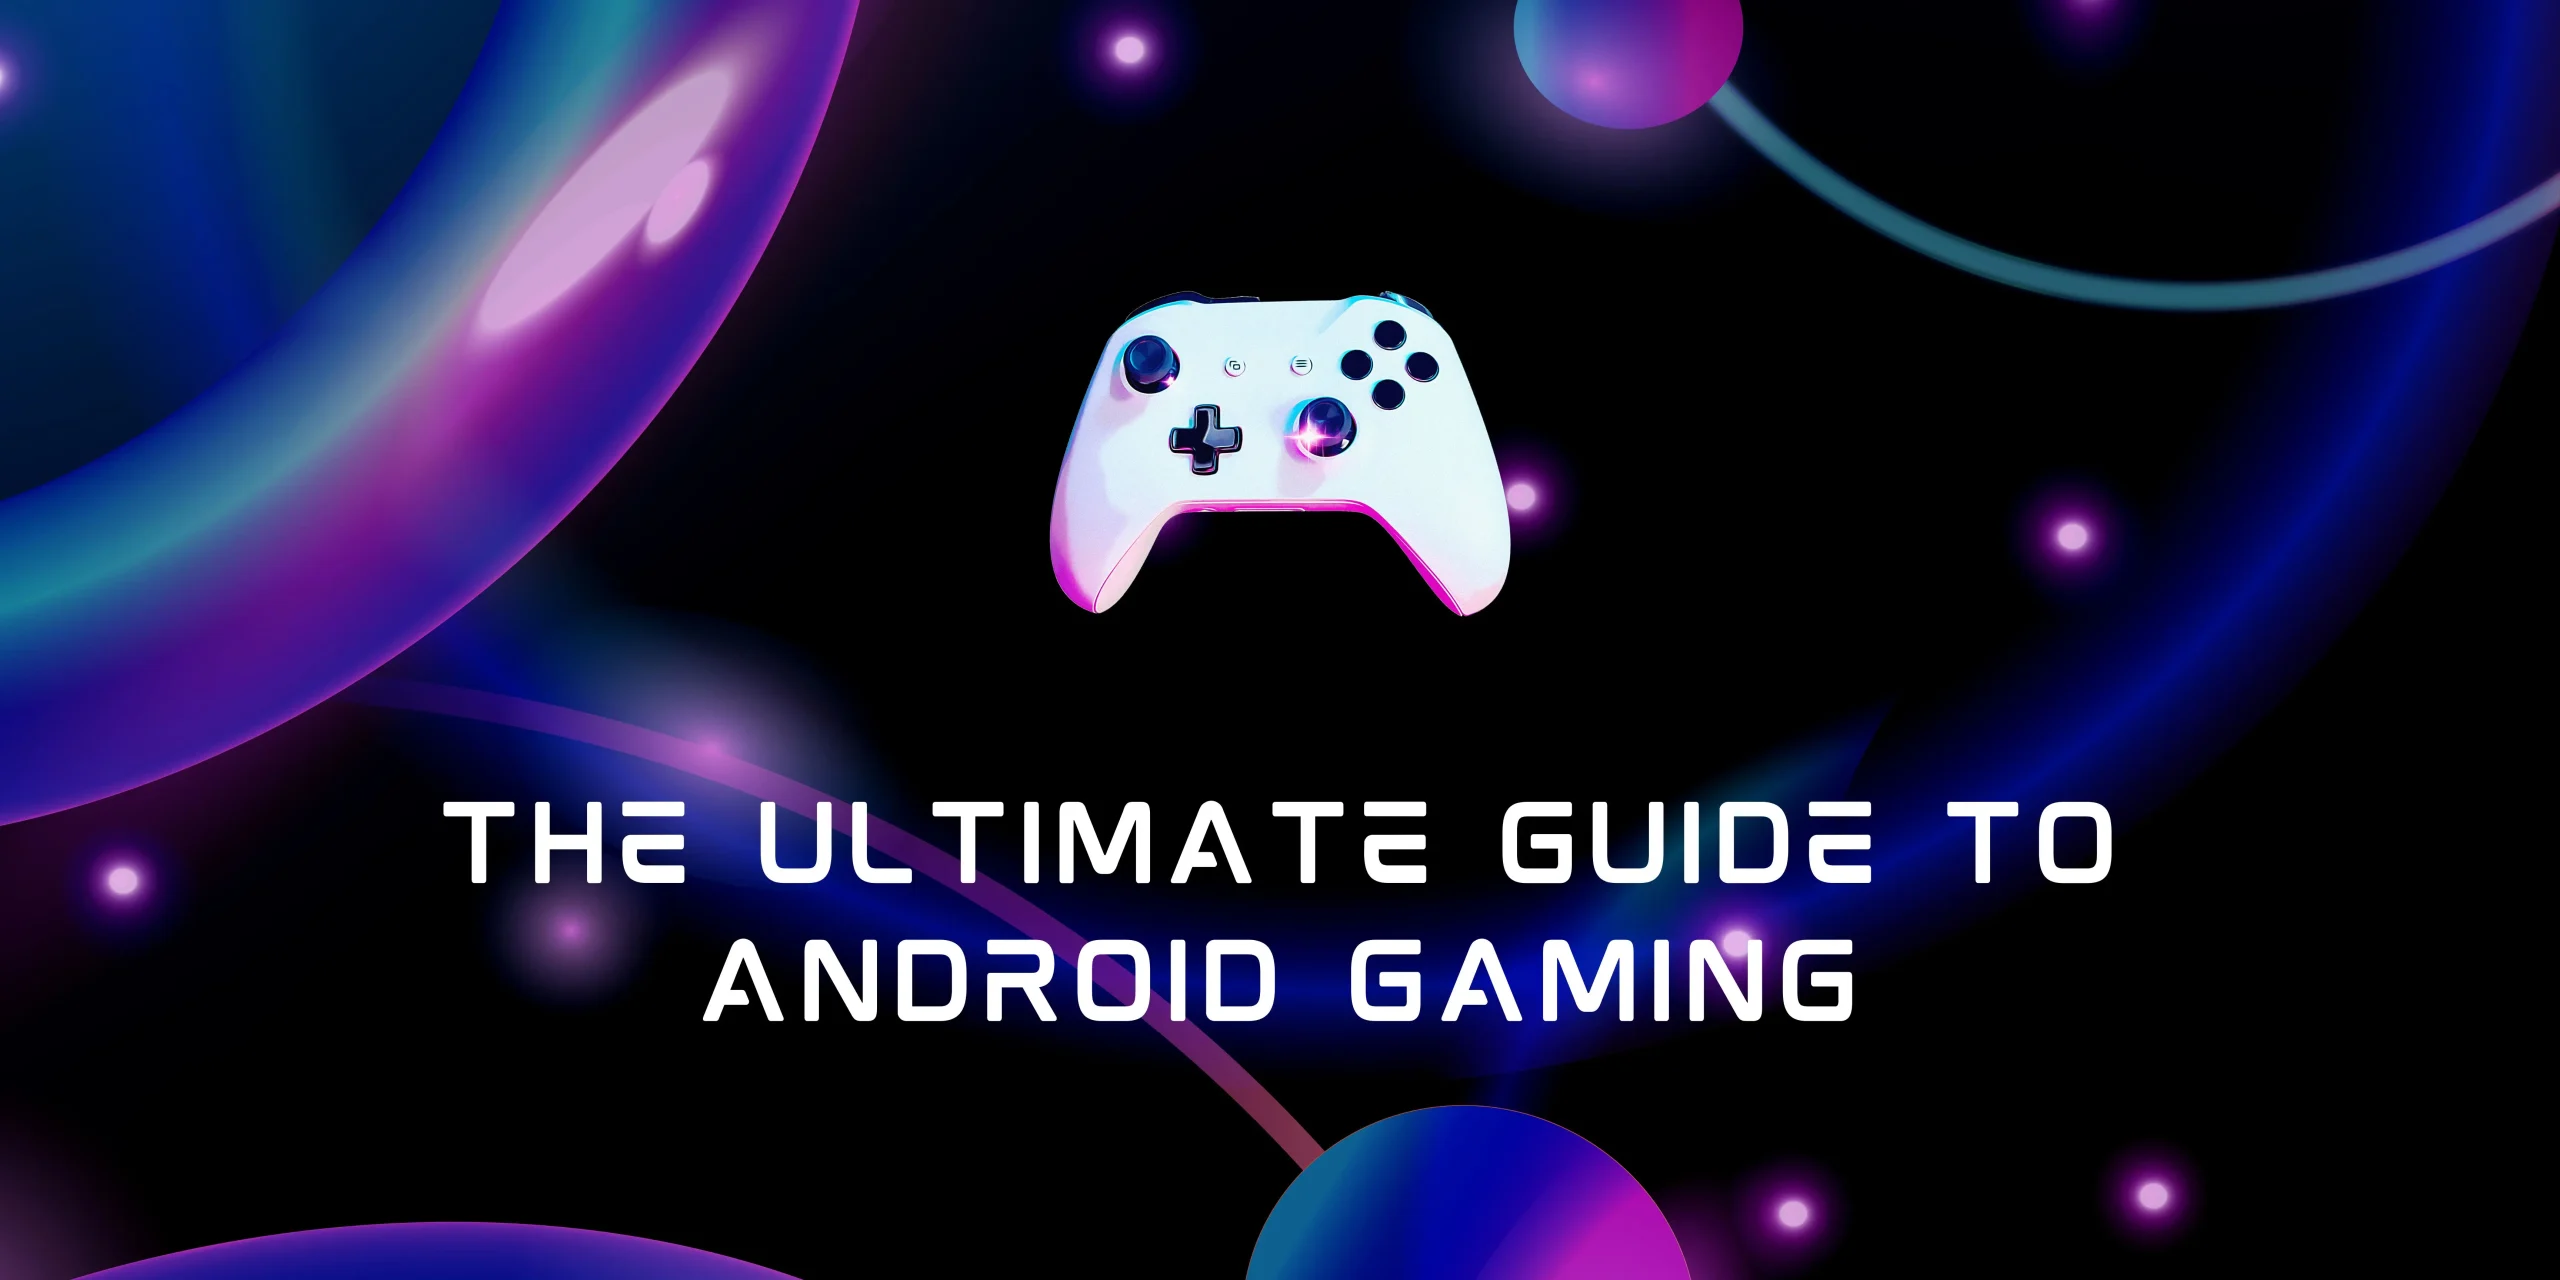 Game On: The Ultimate Guide to Android Gaming